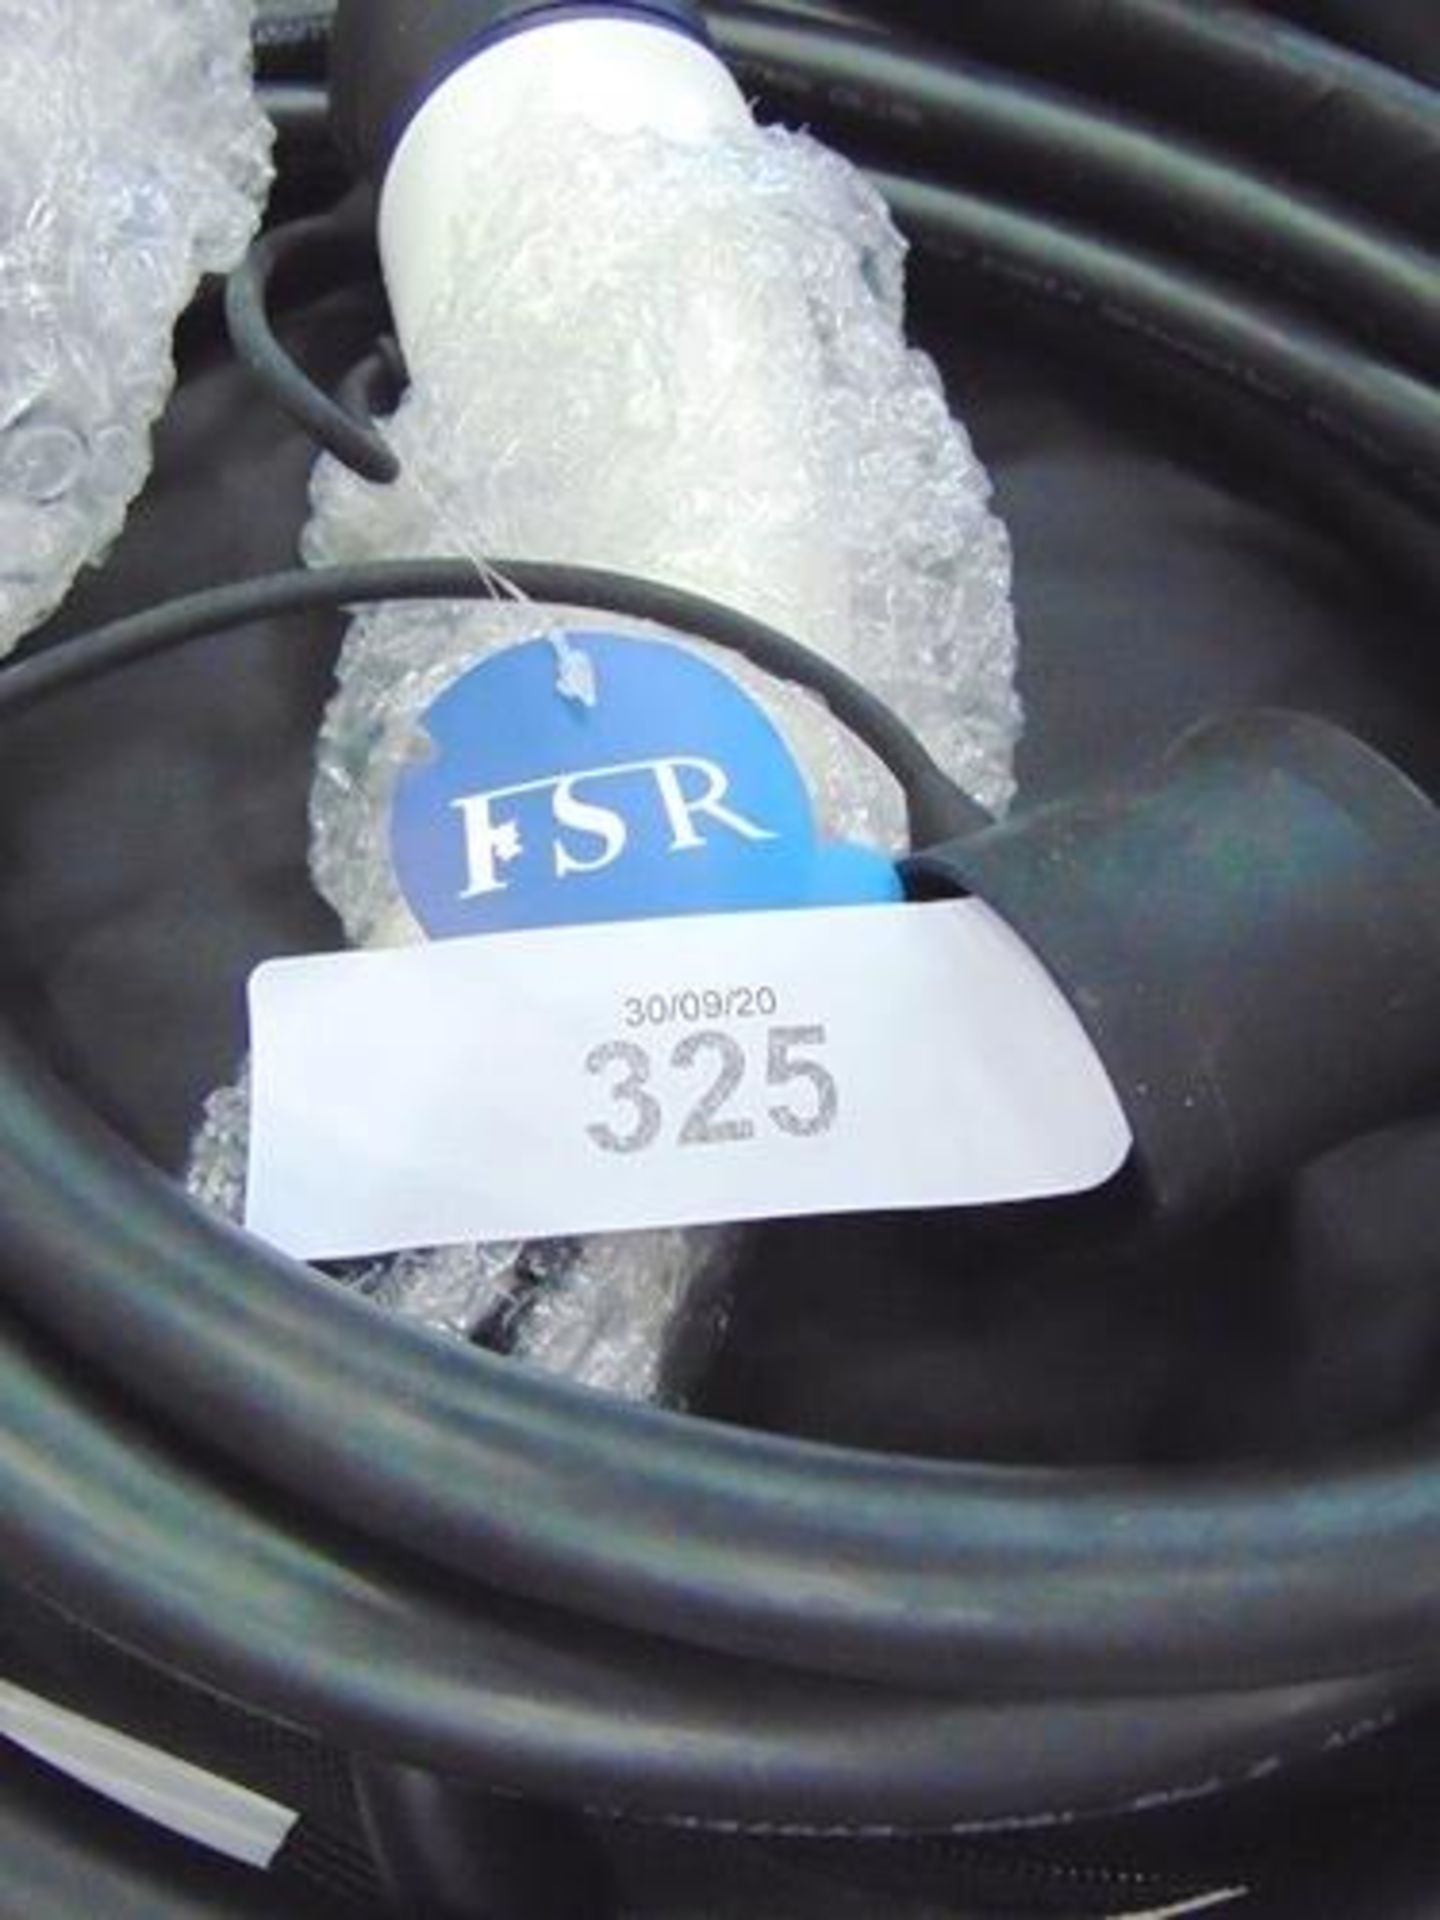 FSR electric vehicle charging cable, P.N. FE-A32D-E, 32 amp, 250V - New (GS9) - Image 2 of 4